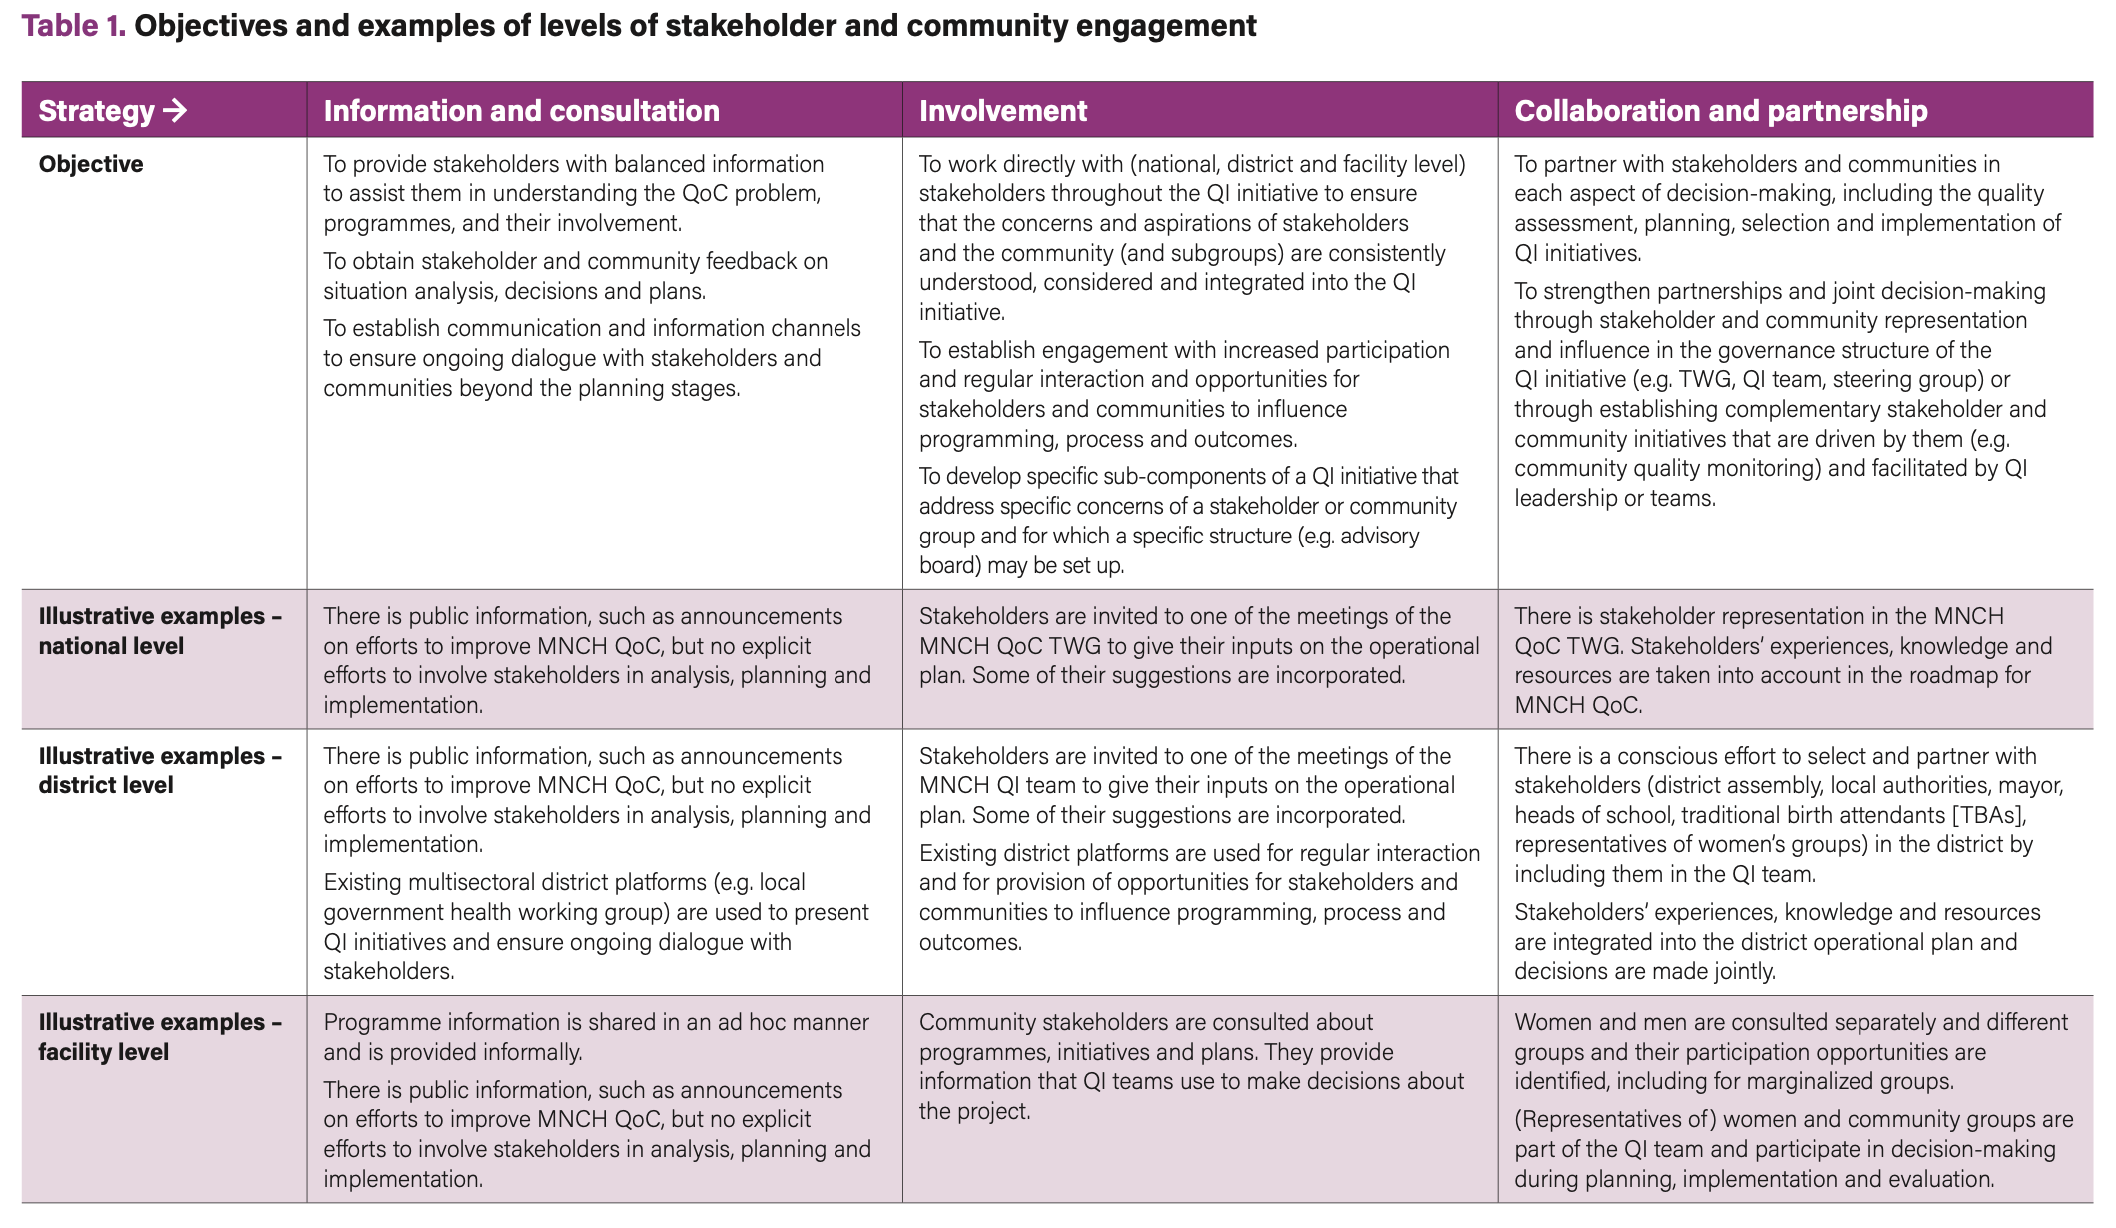 Table 1. Objectives and examples of levels of stakeholder and community engagement